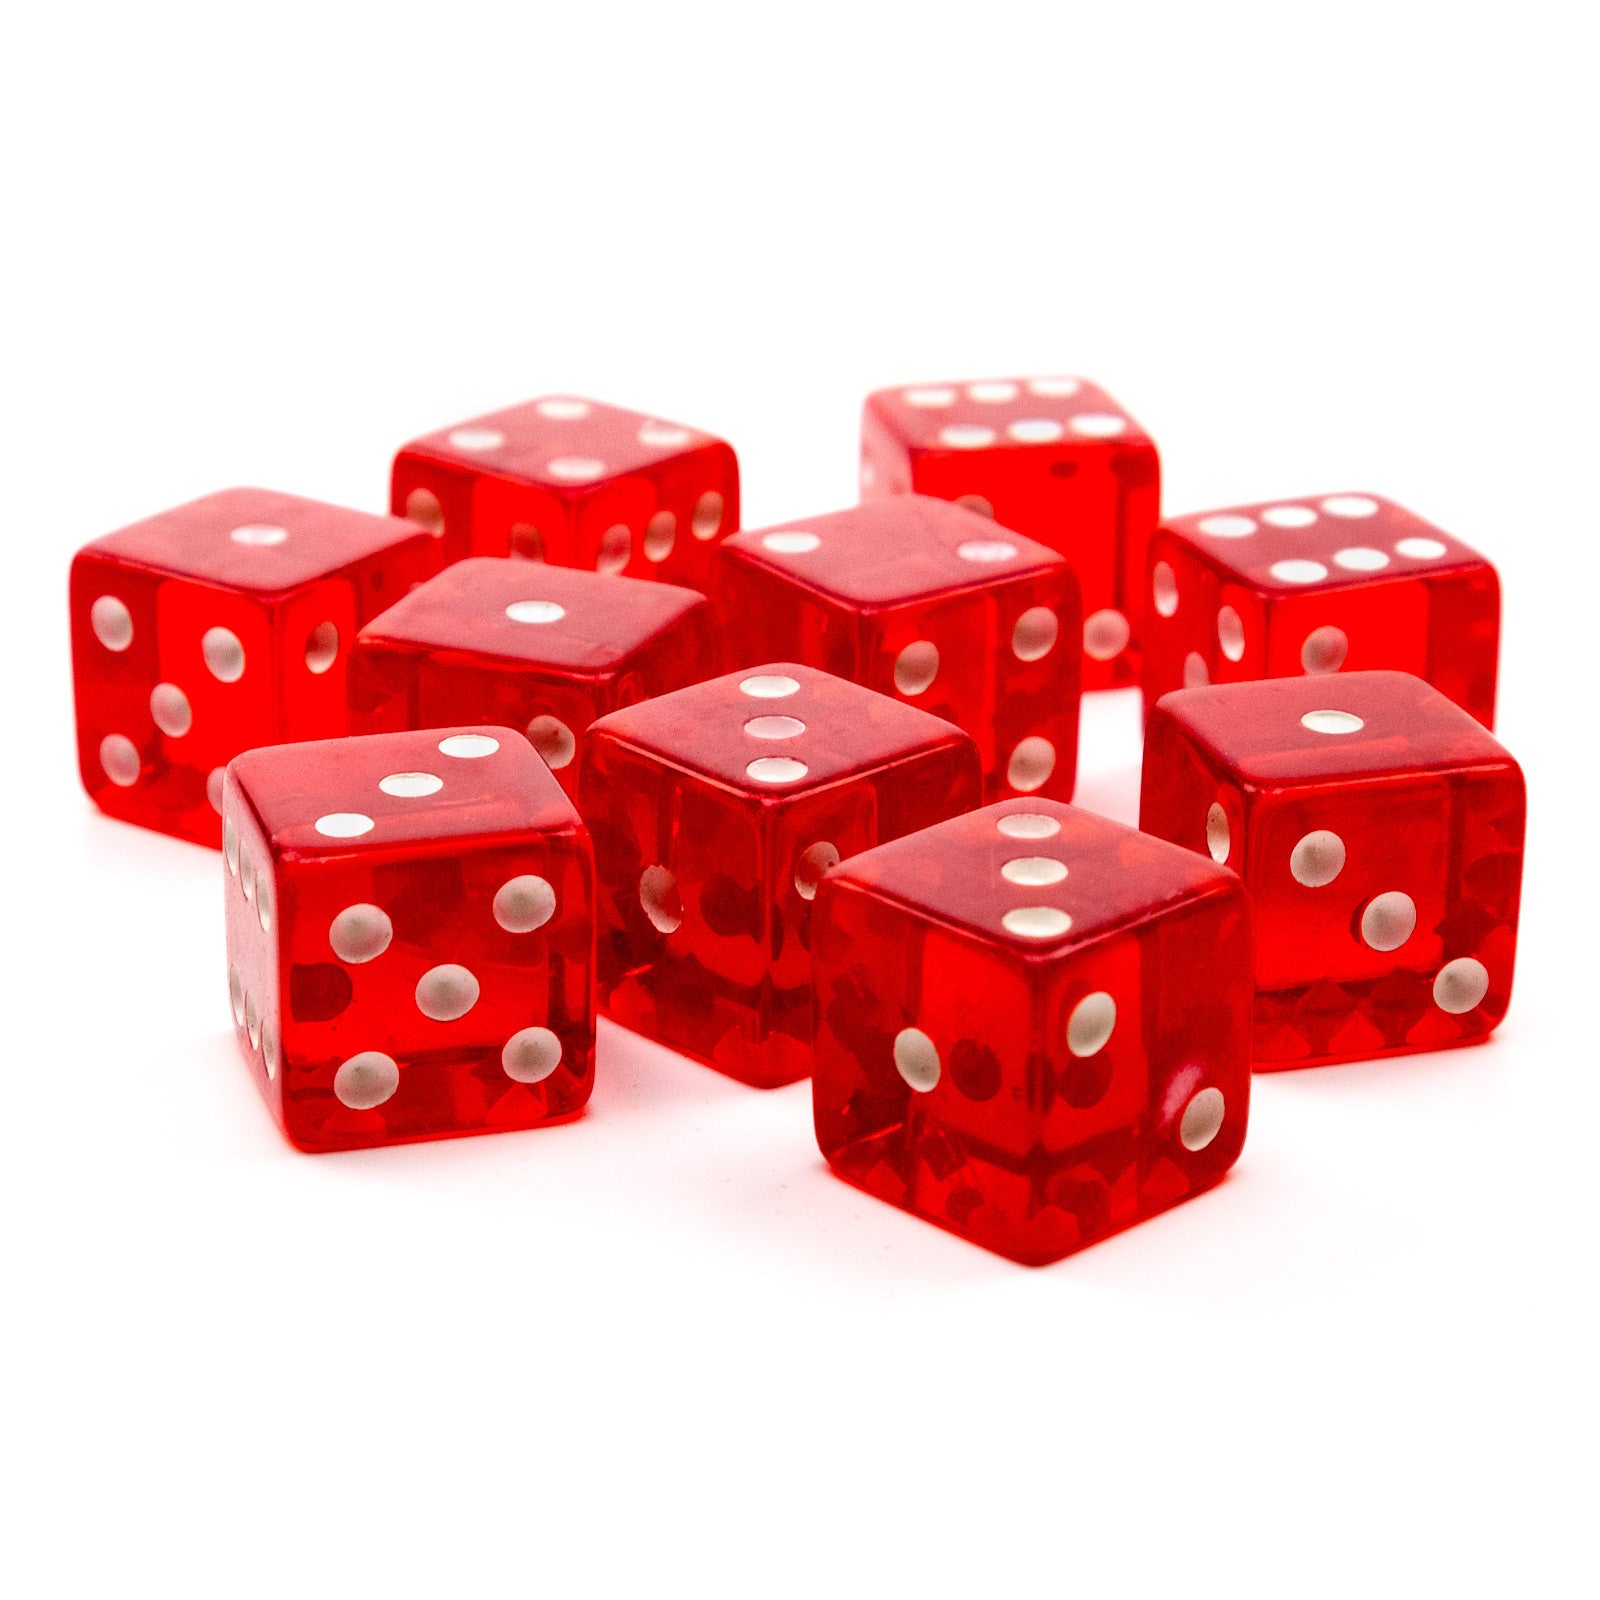 Economy Dice Transparent 18mm - 10 Pack / Red